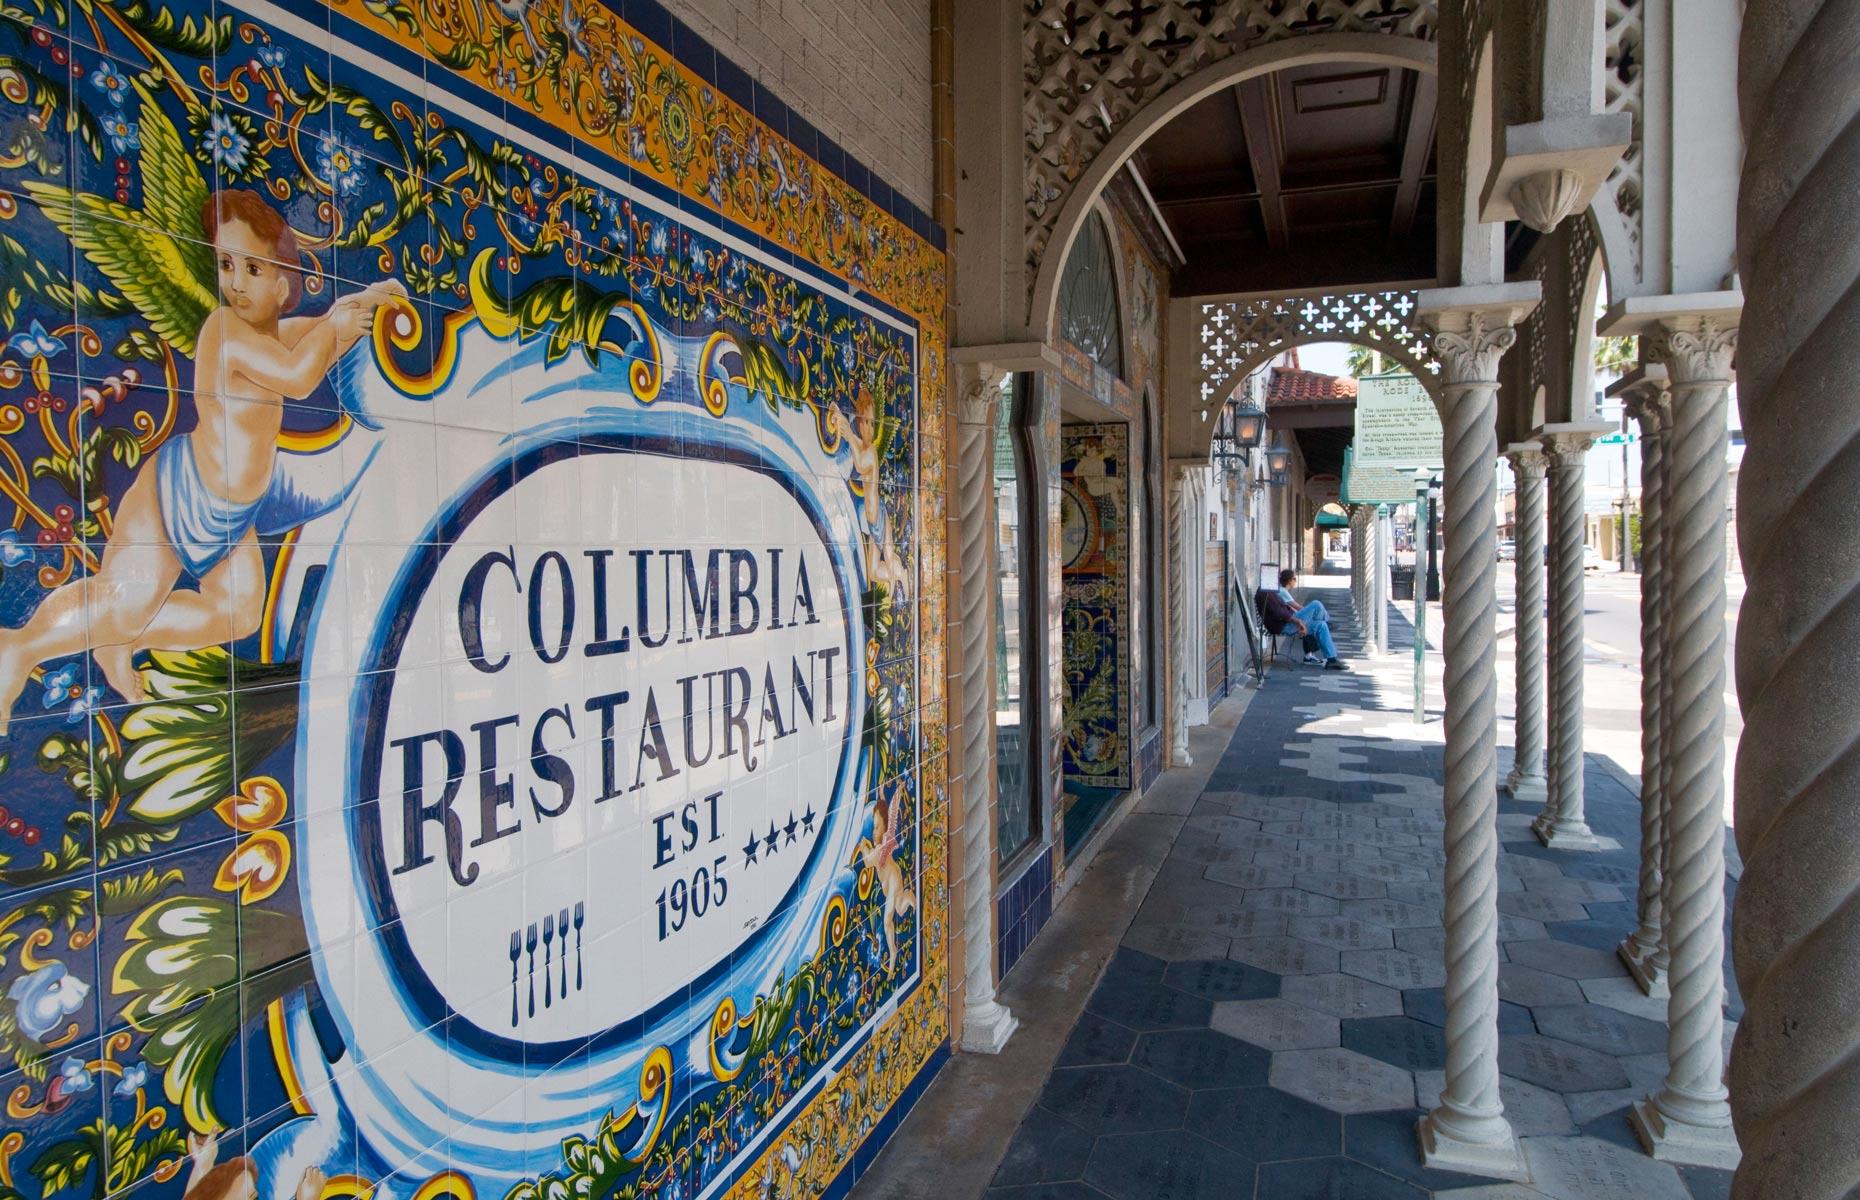 <p>Founded in 1905, <a href="https://www.columbiarestaurant.com/">Columbia Restaurant</a> serves traditional Spanish-Cuban cuisine made to family recipes. It's a stunning building, with a menu bursting with local historic flavor. Although there are three locations, the original Columbia Restaurant is right here in Ybor City, and covers an entire city block. It's currently the largest Spanish restaurant in the world – and the oldest continuously operated eatery in Florida.</p>